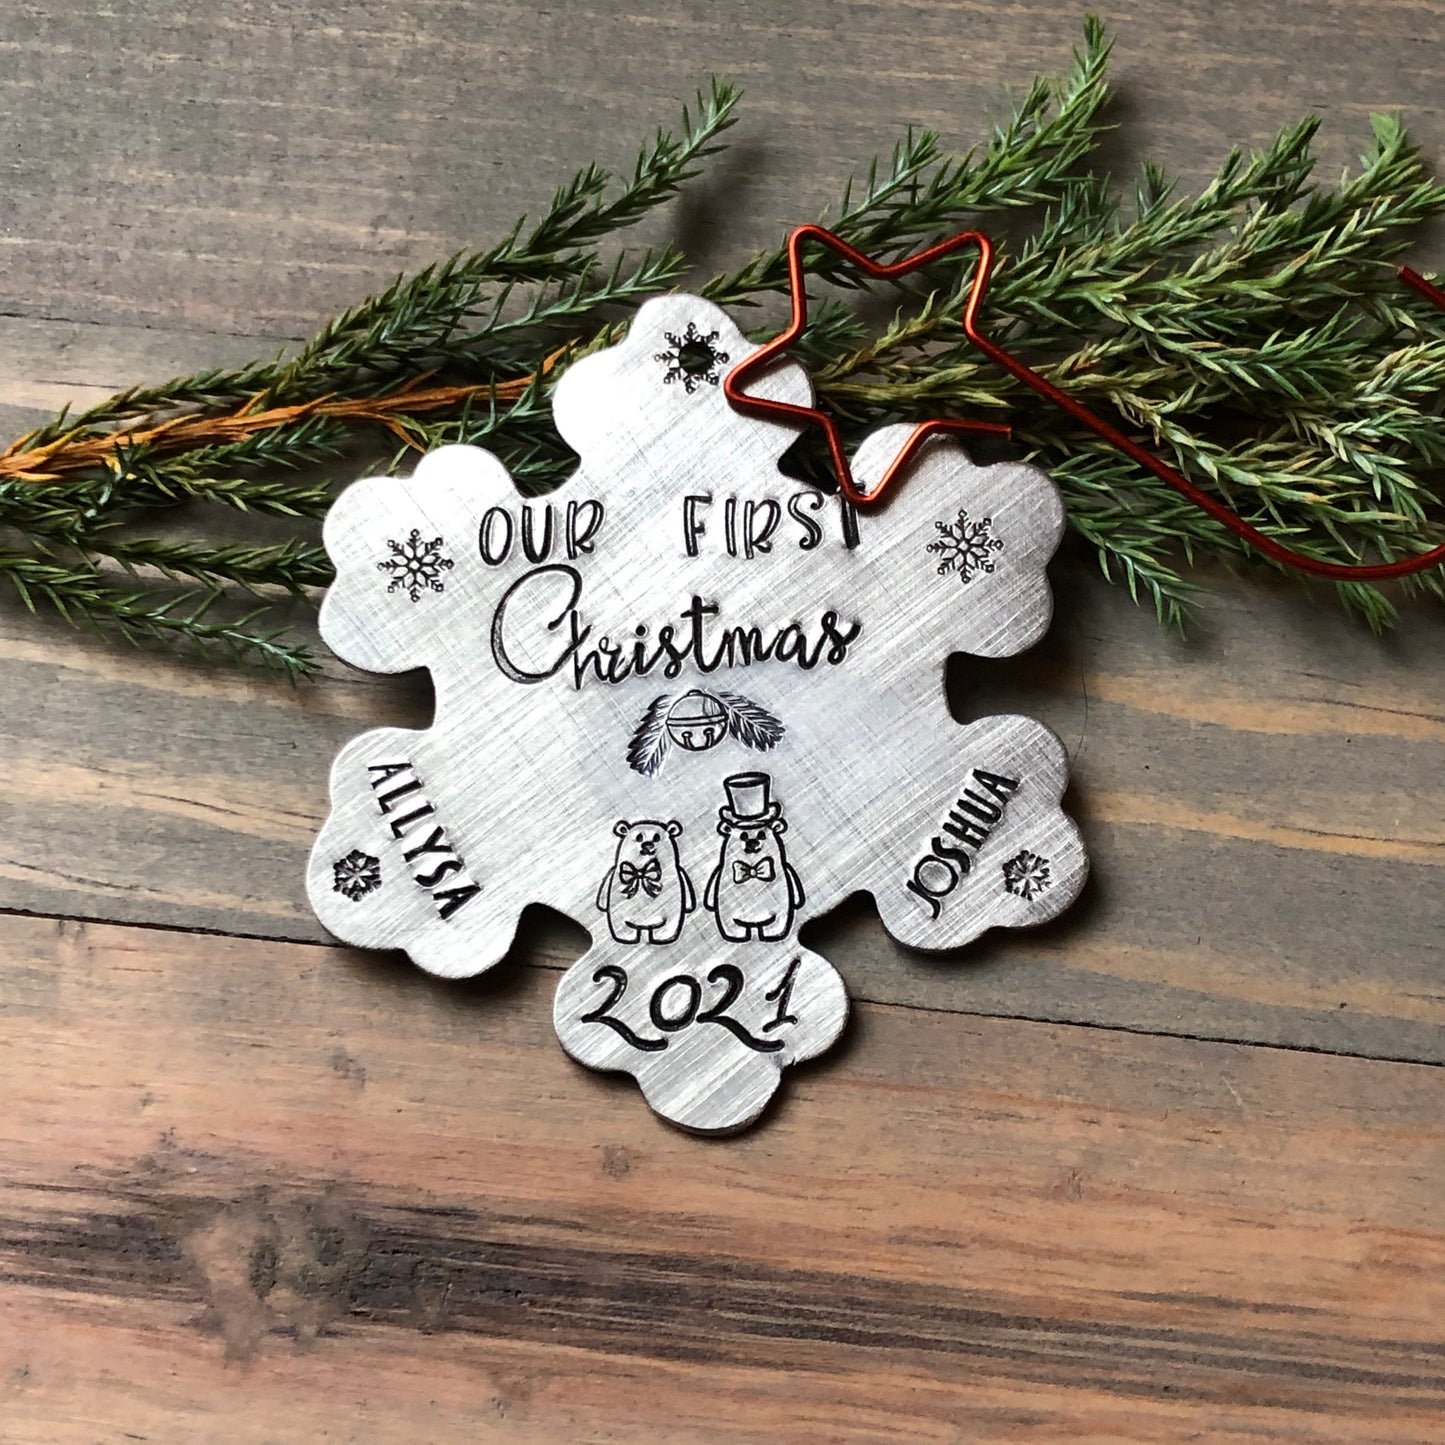 First Christmas Together, 1st Married Christmas, Ornament for Newlyweds, Our First Christmas, Christmas Bears, Gift for First Christmas